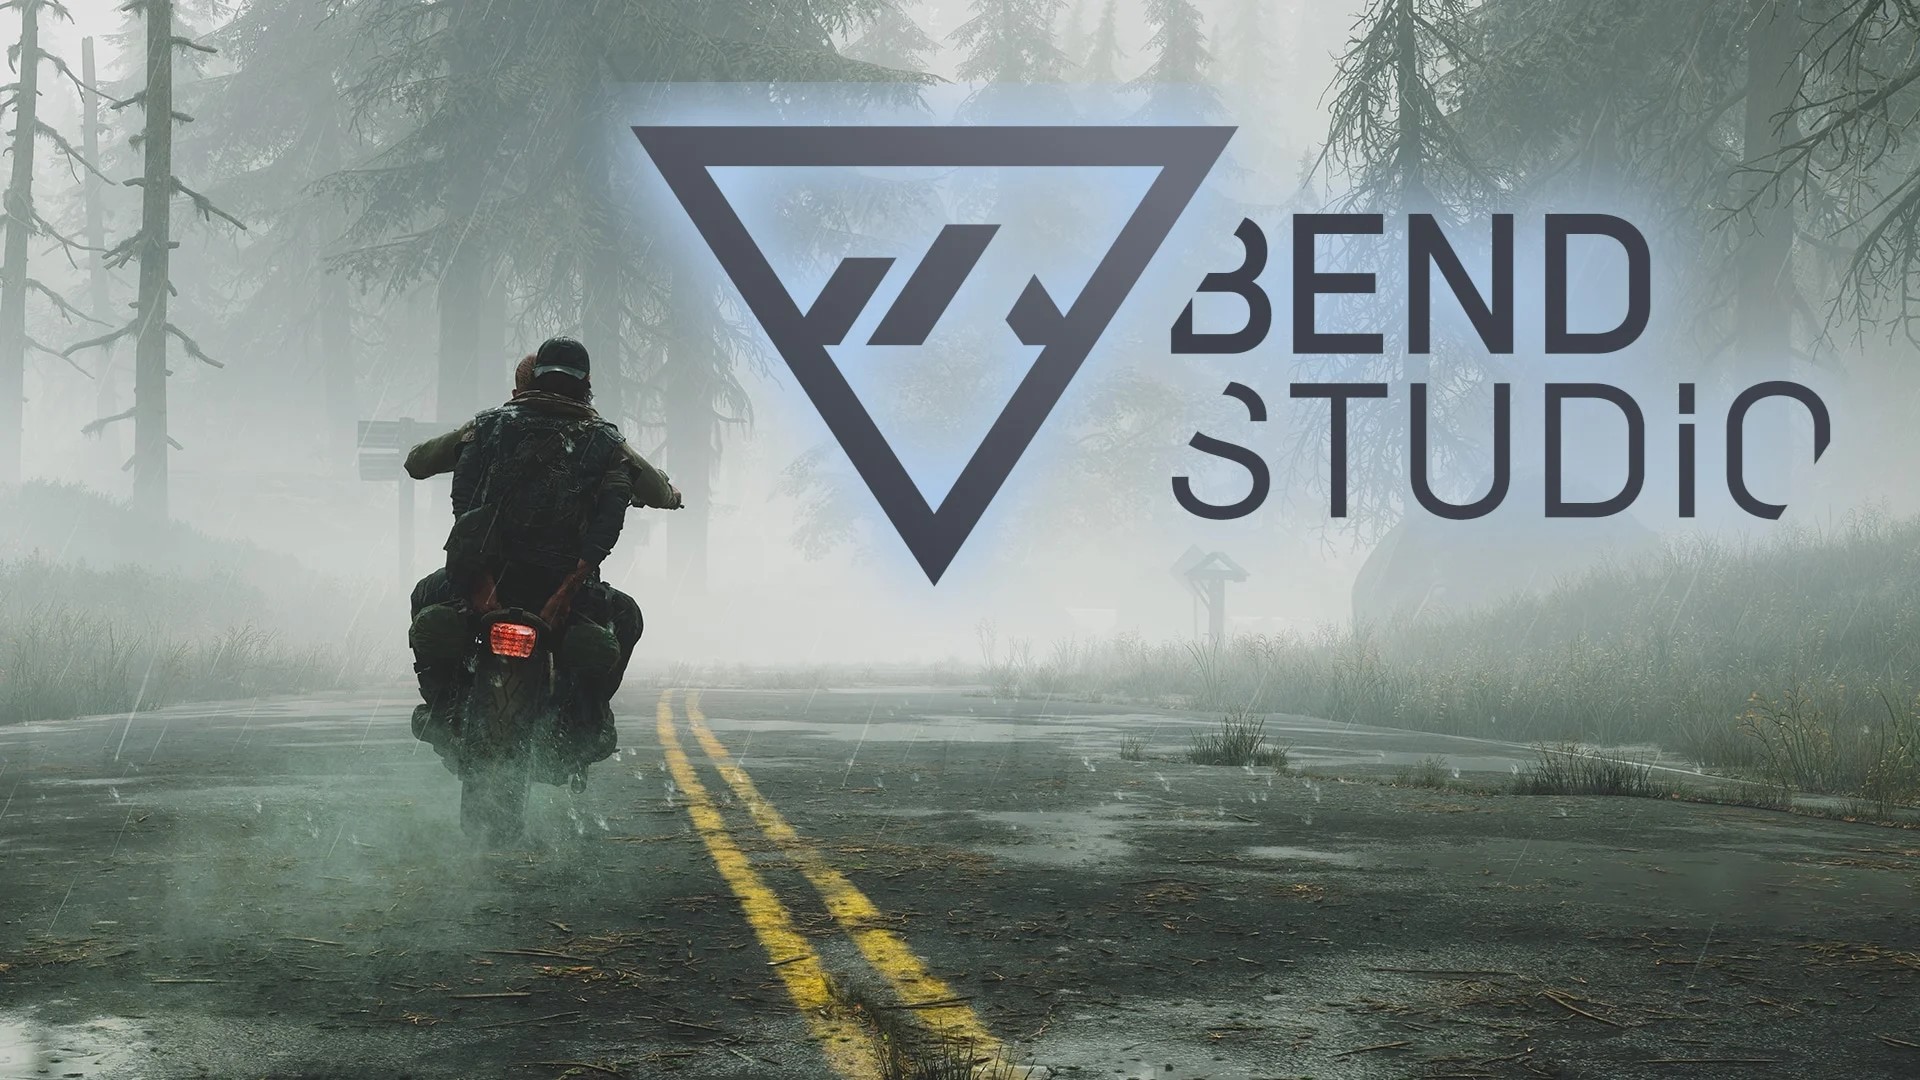 Bend Studio Working On A New Game That Could Be Live Service